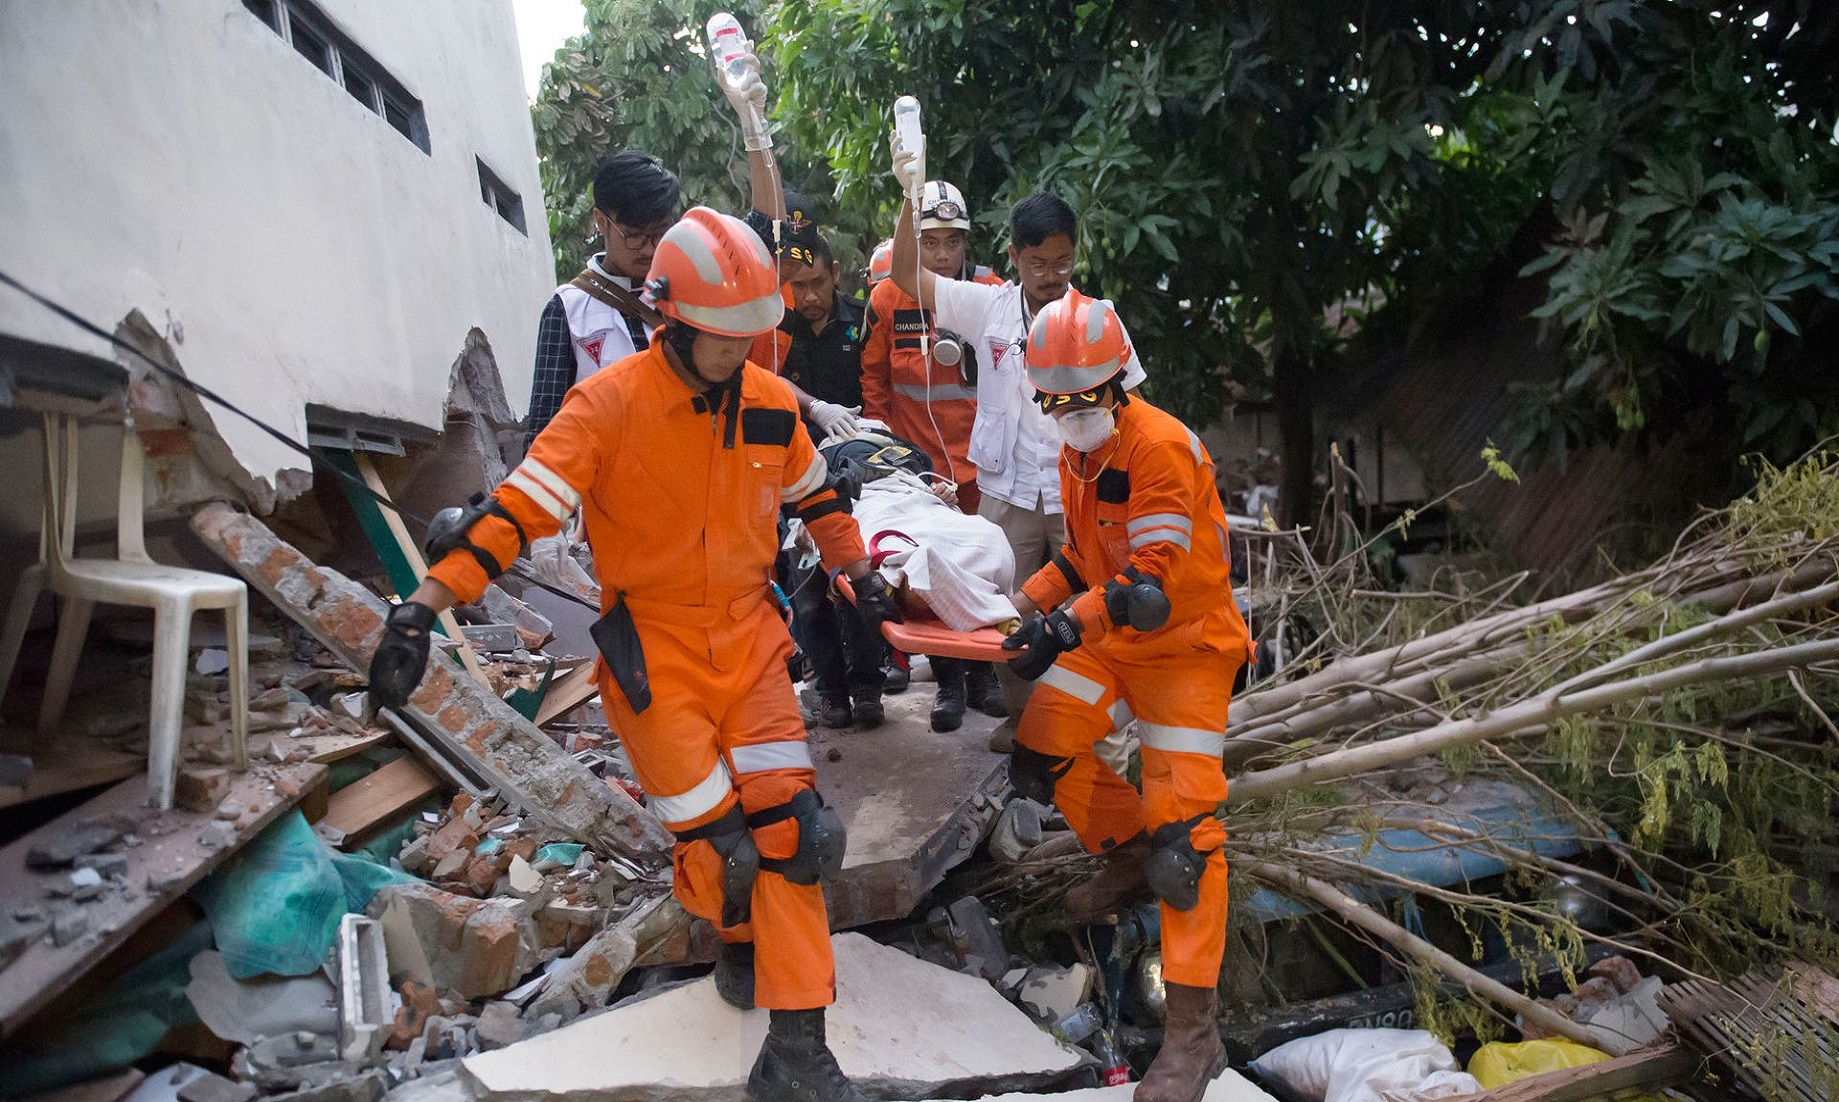 Indonesia’s Strong Quake Injures One, Causes Property Damage